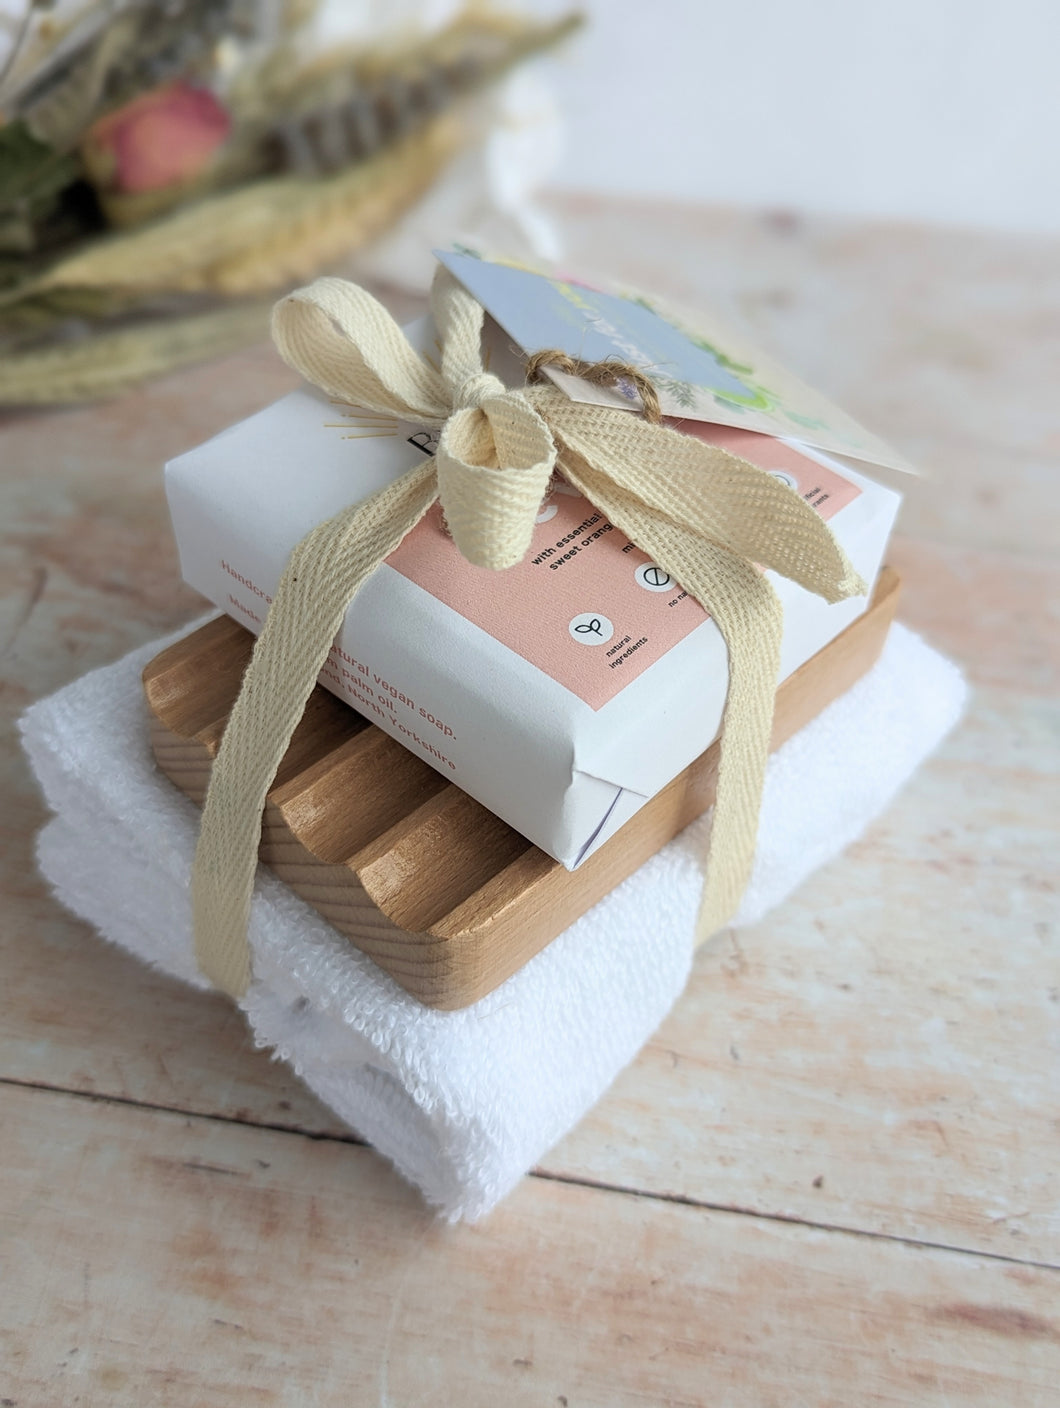 Tranquillity soap gift set